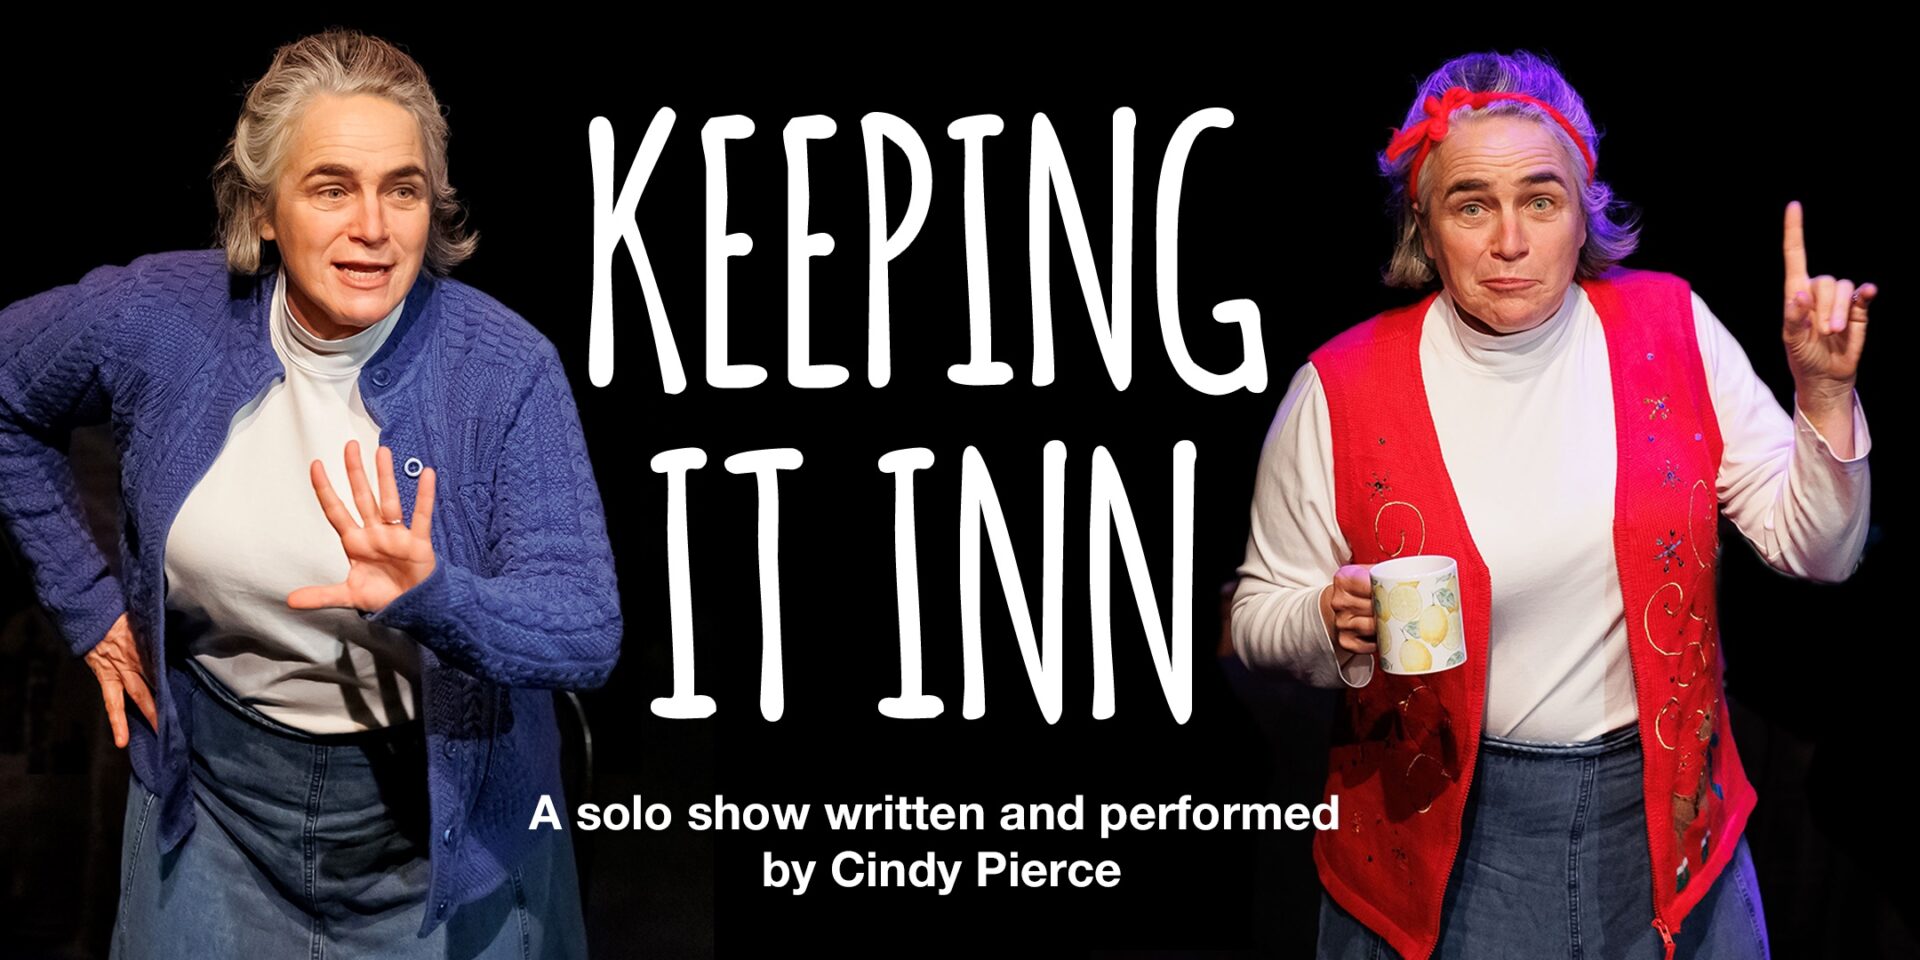 Author and Storyteller Cindy Pierce Brings Solo Show to Watertown